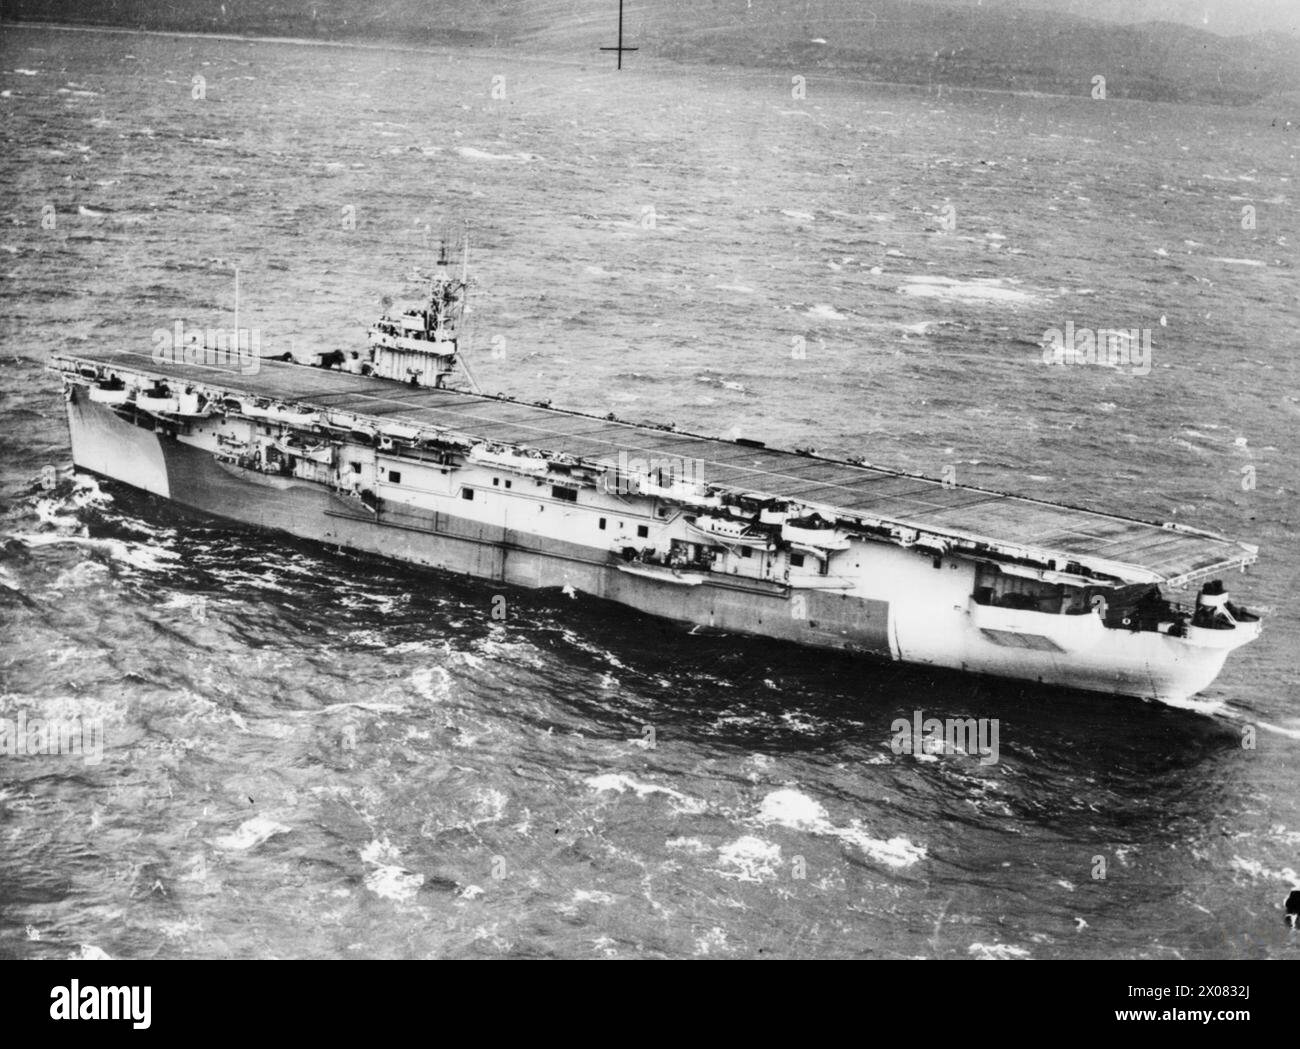 HMS ARBITER, BRITISH SMITER CLASS ESCORT CARRIER. FEBRUARY AND MARCH 1945, AT SEA, FROM THE AIR. - , Royal Navy, ARBITER (HMS) Stock Photo